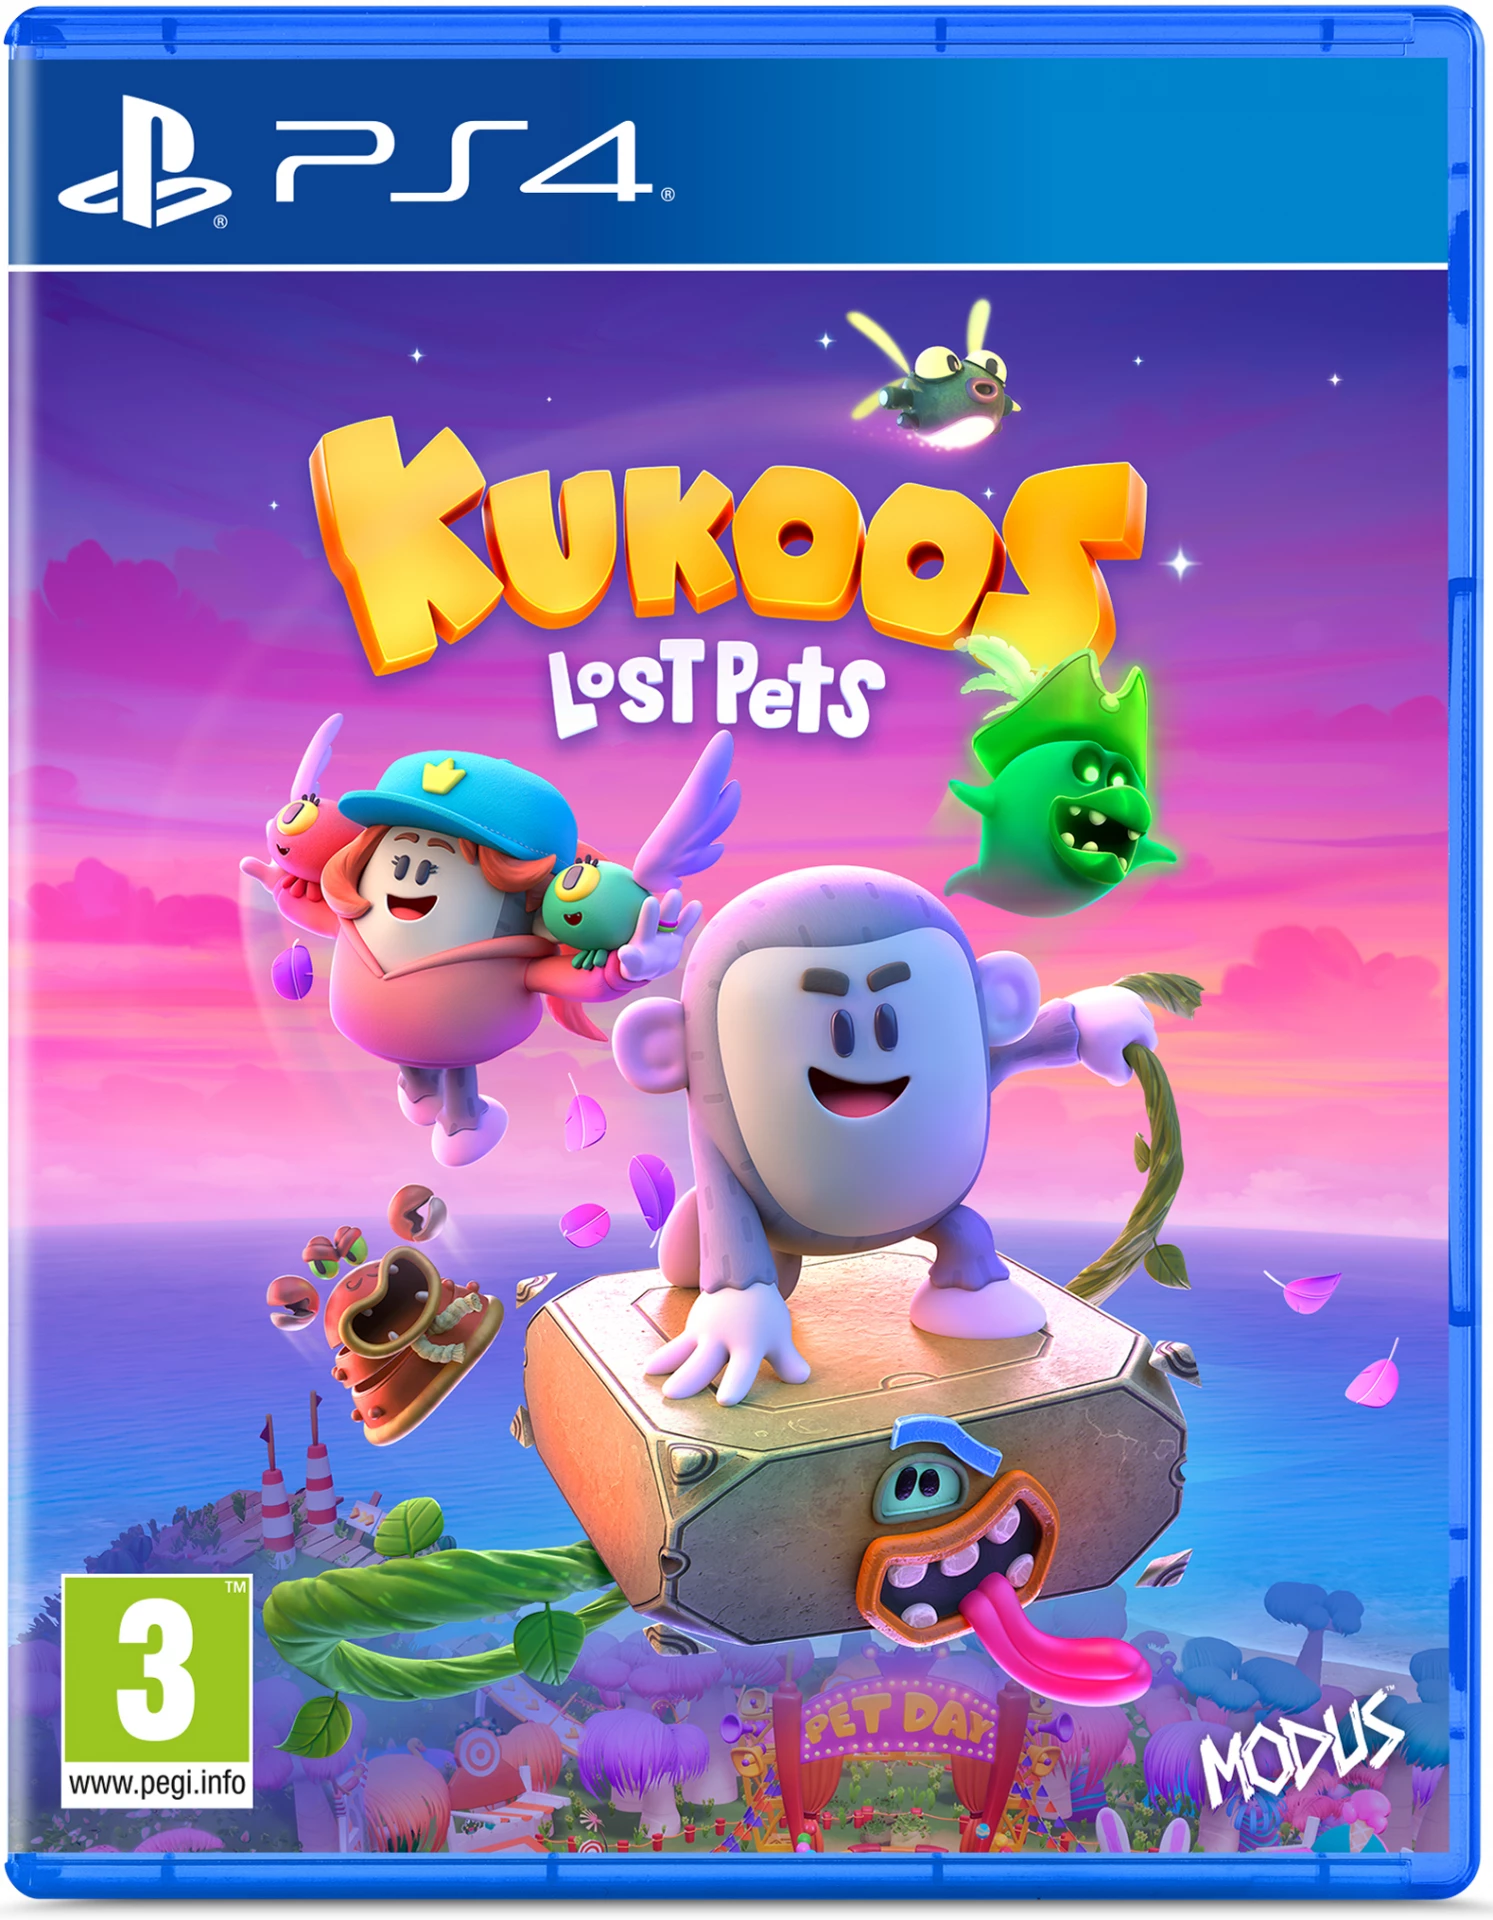 Kukoos: Lost Pets (PS4), Modus